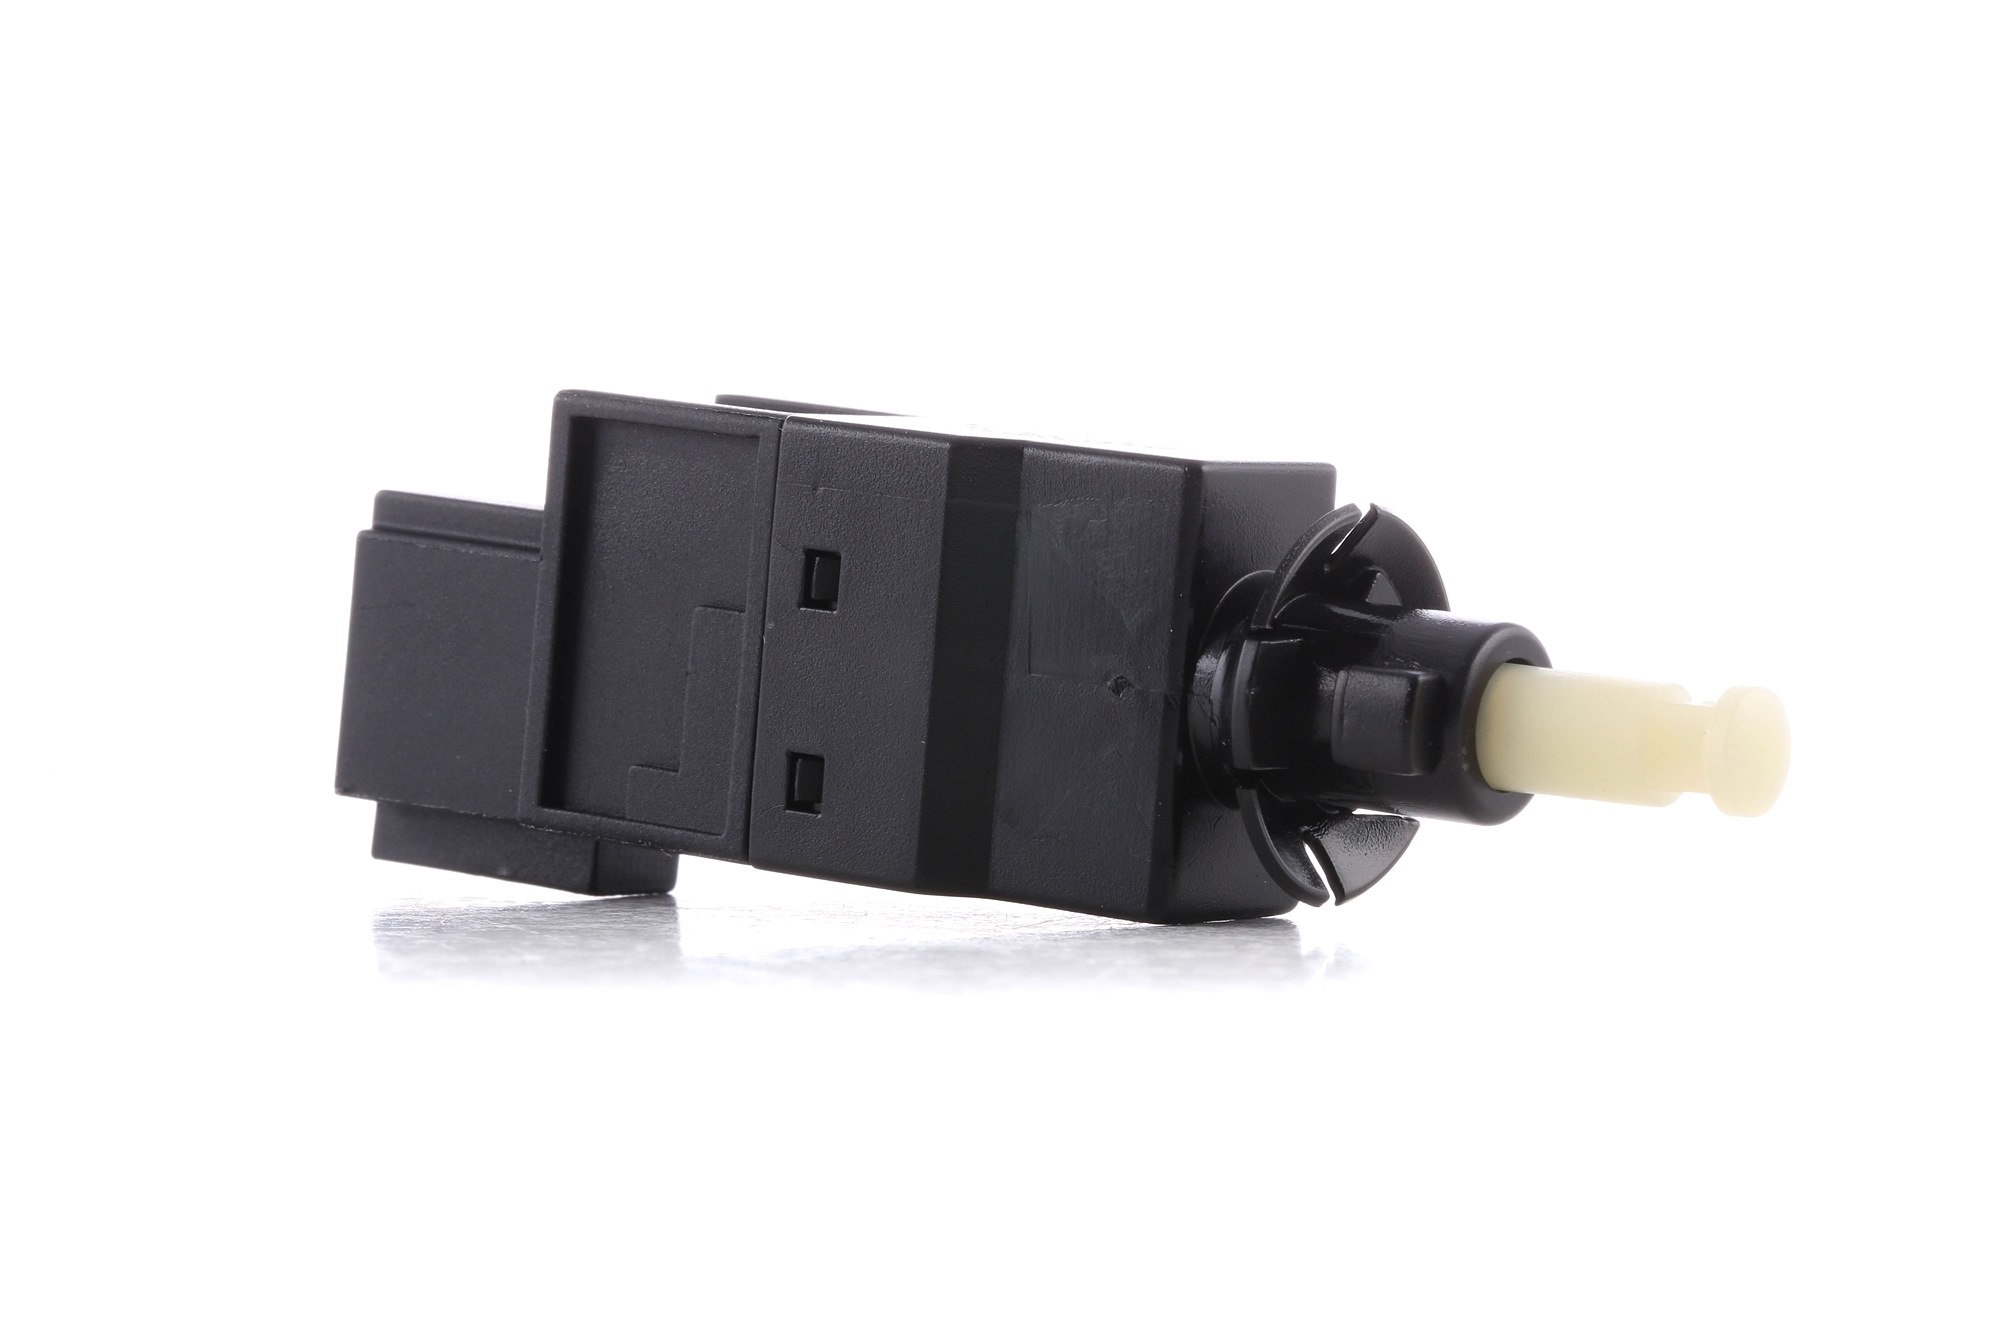 MEYLE 014 890 0008 Brake Light Switch Manual (foot operated), 4-pin connector, ORIGINAL Quality